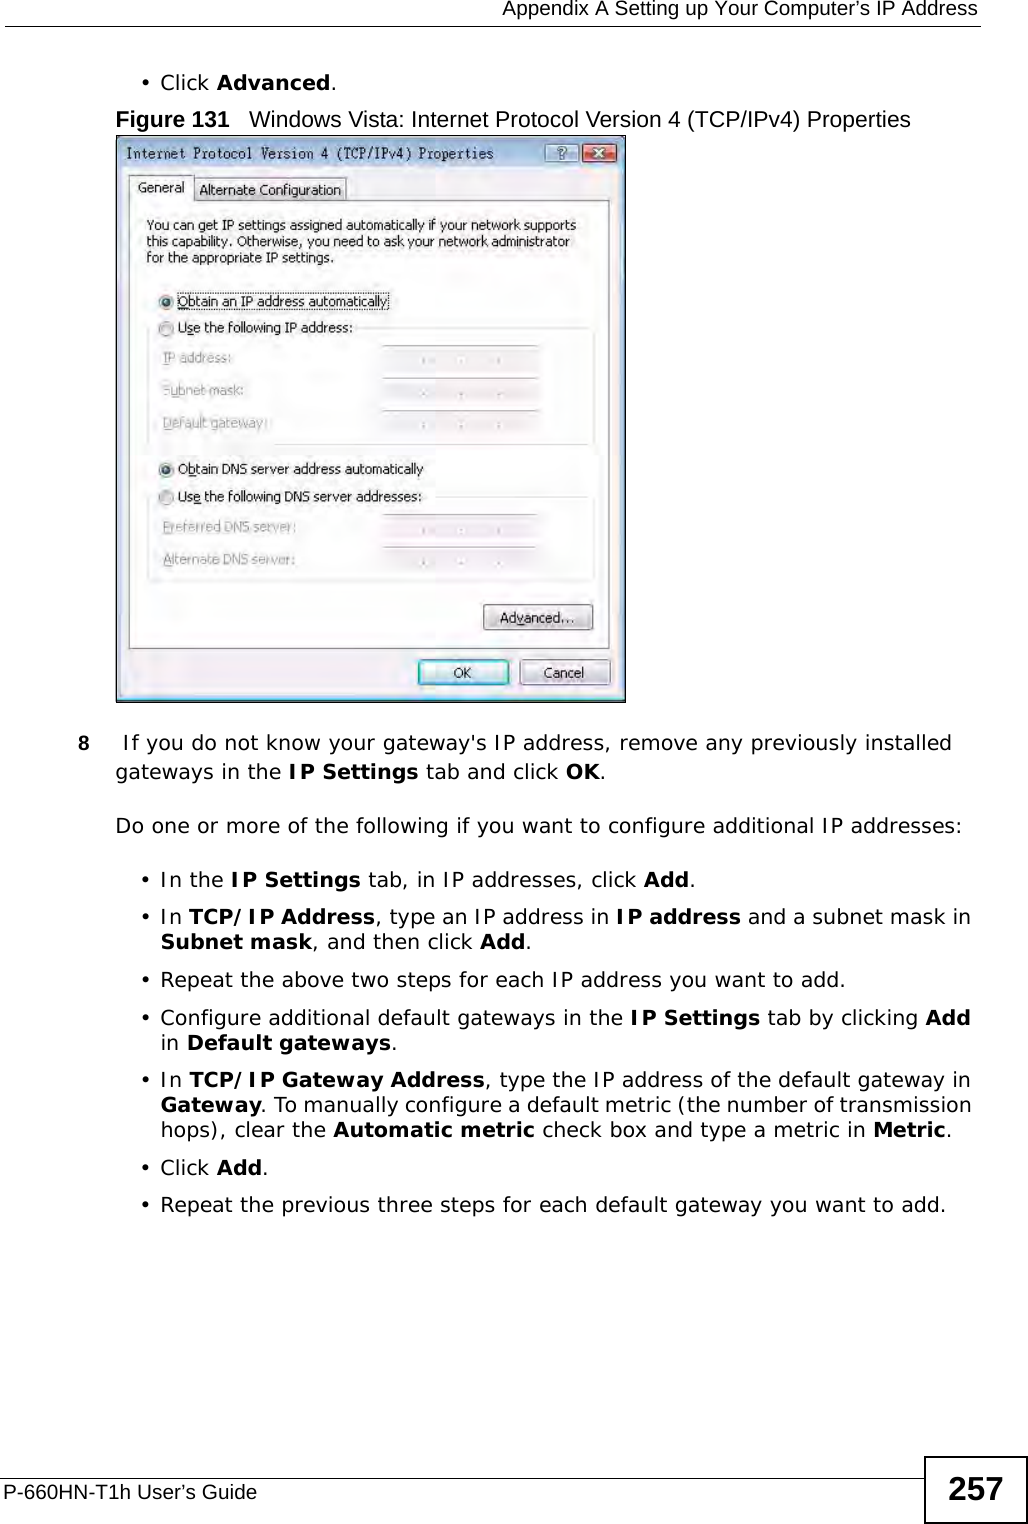  Appendix A Setting up Your Computer’s IP AddressP-660HN-T1h User’s Guide 257•Click Advanced.Figure 131   Windows Vista: Internet Protocol Version 4 (TCP/IPv4) Properties8 If you do not know your gateway&apos;s IP address, remove any previously installed gateways in the IP Settings tab and click OK.Do one or more of the following if you want to configure additional IP addresses:•In the IP Settings tab, in IP addresses, click Add.•In TCP/IP Address, type an IP address in IP address and a subnet mask in Subnet mask, and then click Add.• Repeat the above two steps for each IP address you want to add.• Configure additional default gateways in the IP Settings tab by clicking Add in Default gateways.•In TCP/IP Gateway Address, type the IP address of the default gateway in Gateway. To manually configure a default metric (the number of transmission hops), clear the Automatic metric check box and type a metric in Metric.•Click Add. • Repeat the previous three steps for each default gateway you want to add.